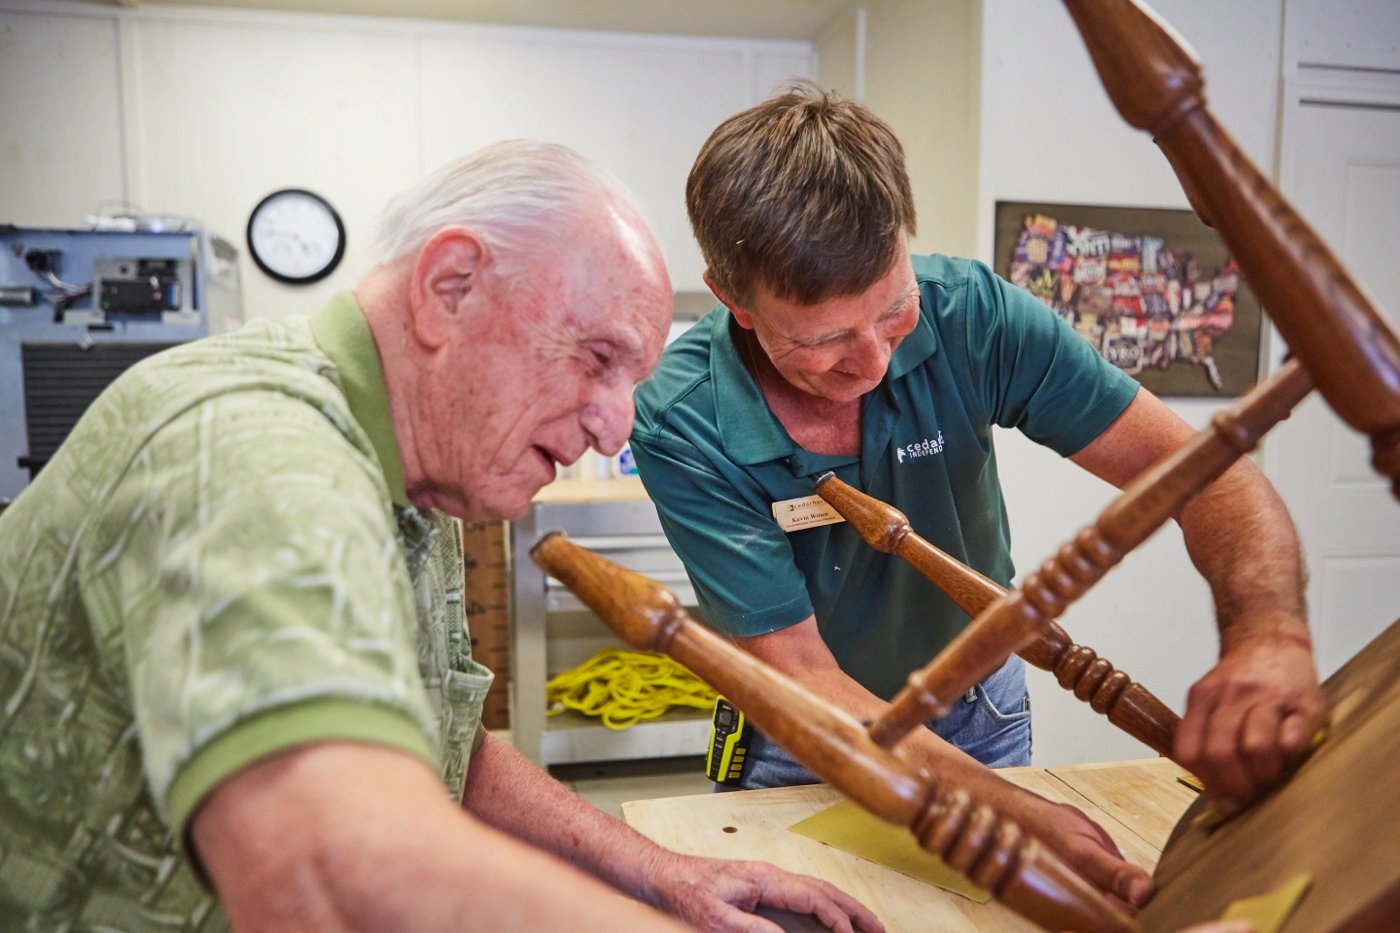 A senior and staff member work together on a woodworking project